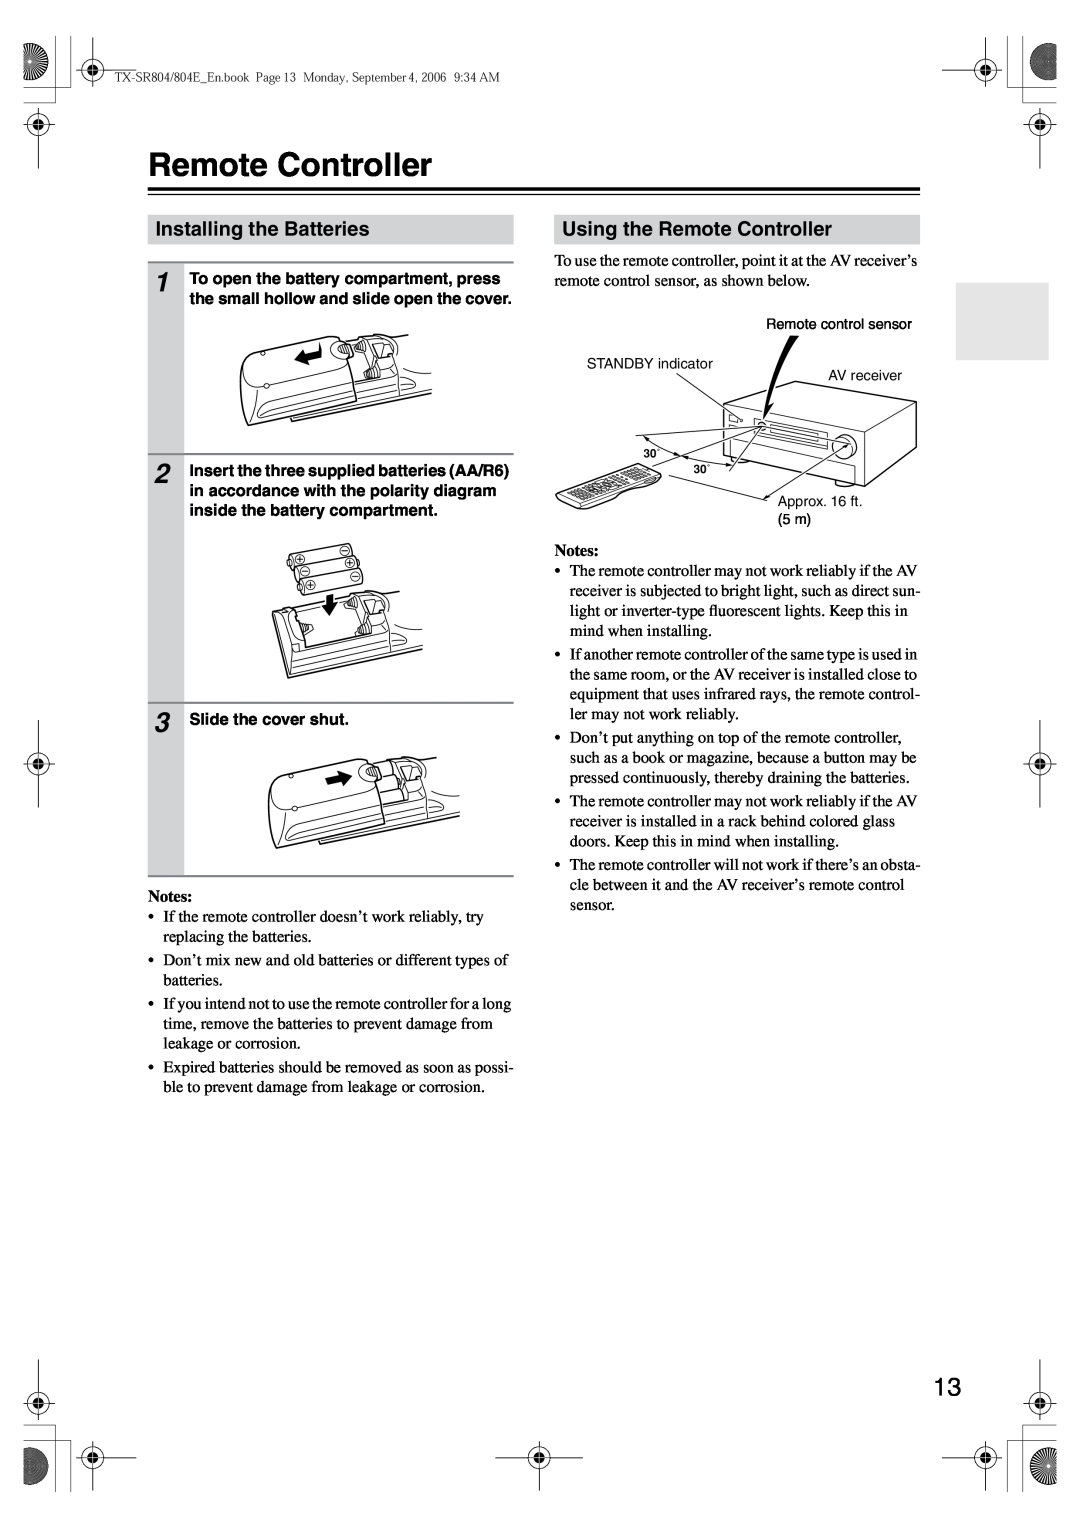 Onkyo TX-SR804E instruction manual Installing the Batteries, Using the Remote Controller, Notes 